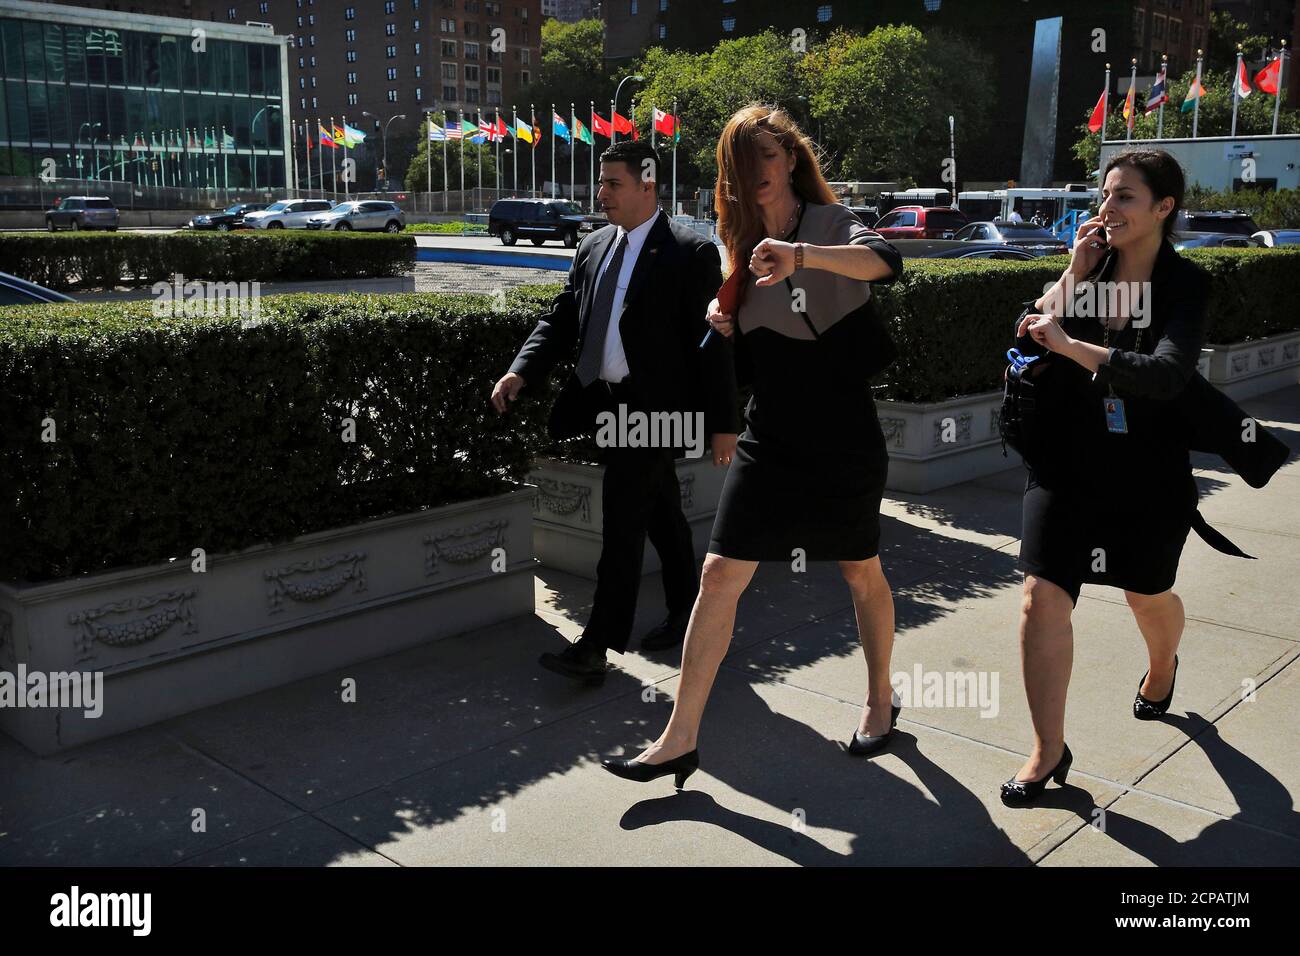 U.S. Ambassador Samantha Power (C) arrives at the United Nations Headquarters in New York, September 5, 2013. The United States declared on Thursday that it has given up trying to work with the U.N. Security Council on Syria, accusing Russia of holding the council hostage and allowing Moscow's allies in Syria to deploy poison gas against innocent children. REUTERS/Brendan McDermid (UNITED STATES - Tags: POLITICS CONFLICT MILITARY) Stock Photo